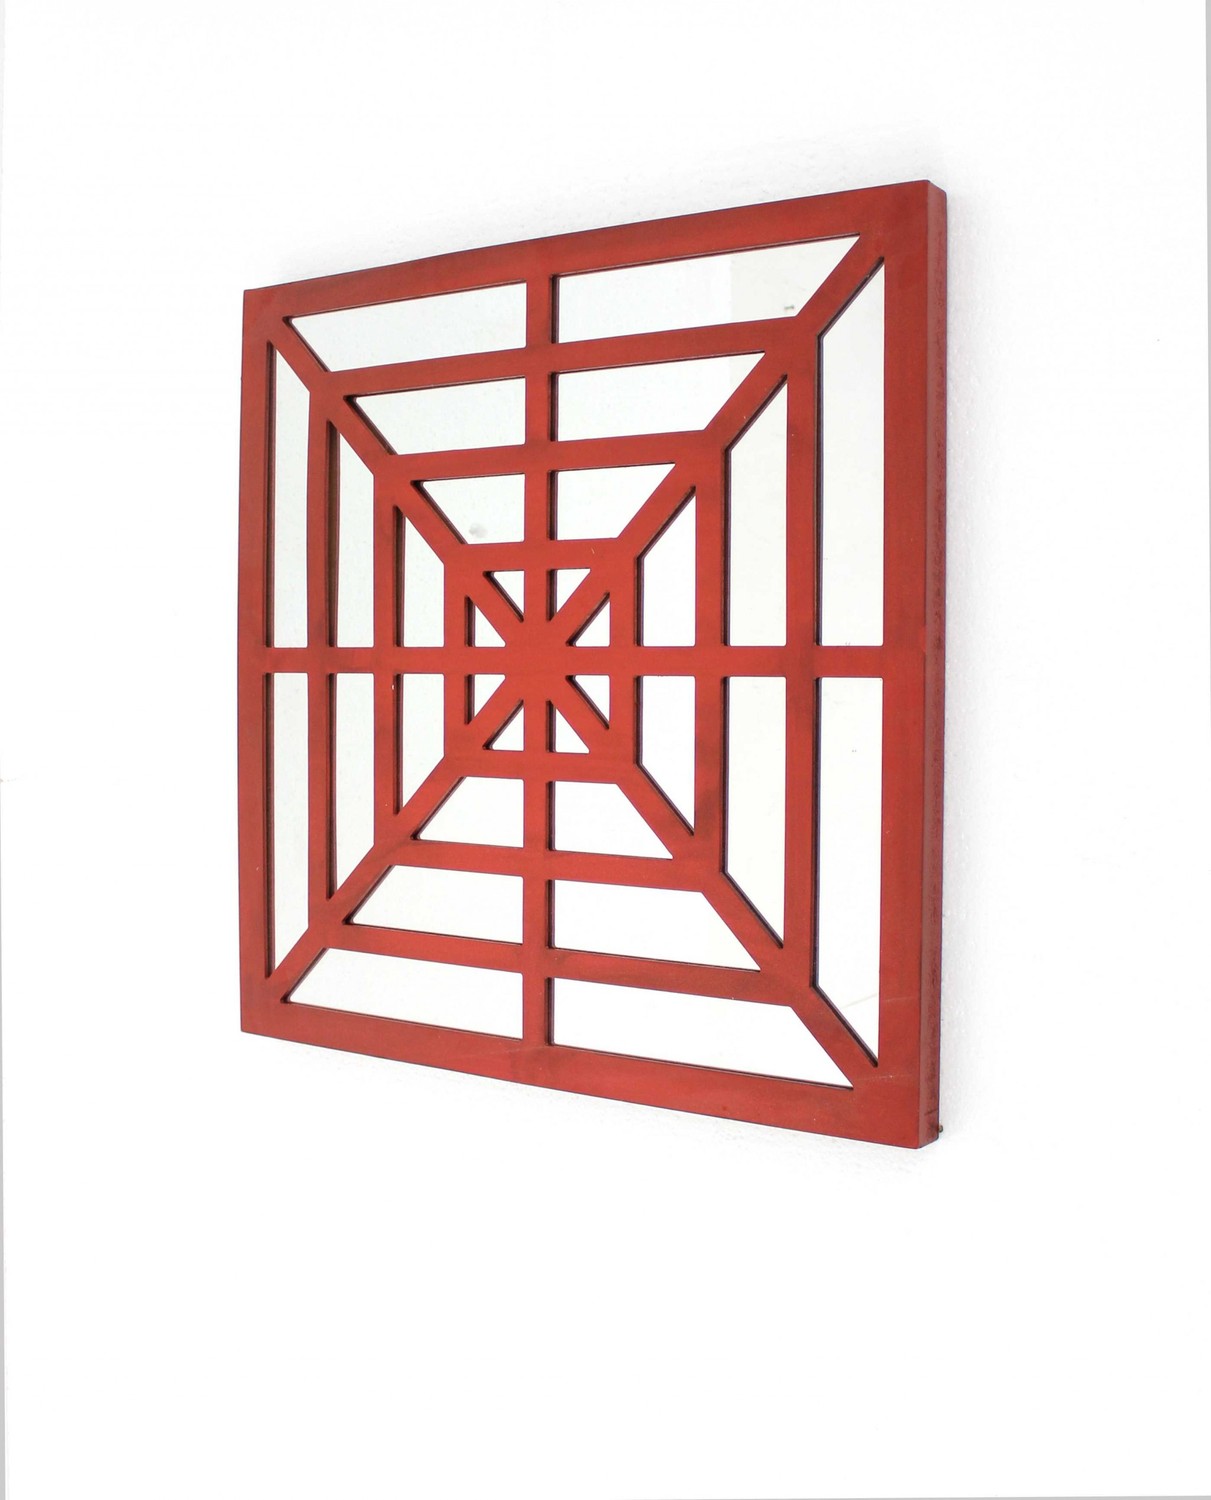 1.25" x 23.25" x 23.25" 23.25" x 1.25" x 23.25 Red, Mirrored, Wooden - Wall Decor